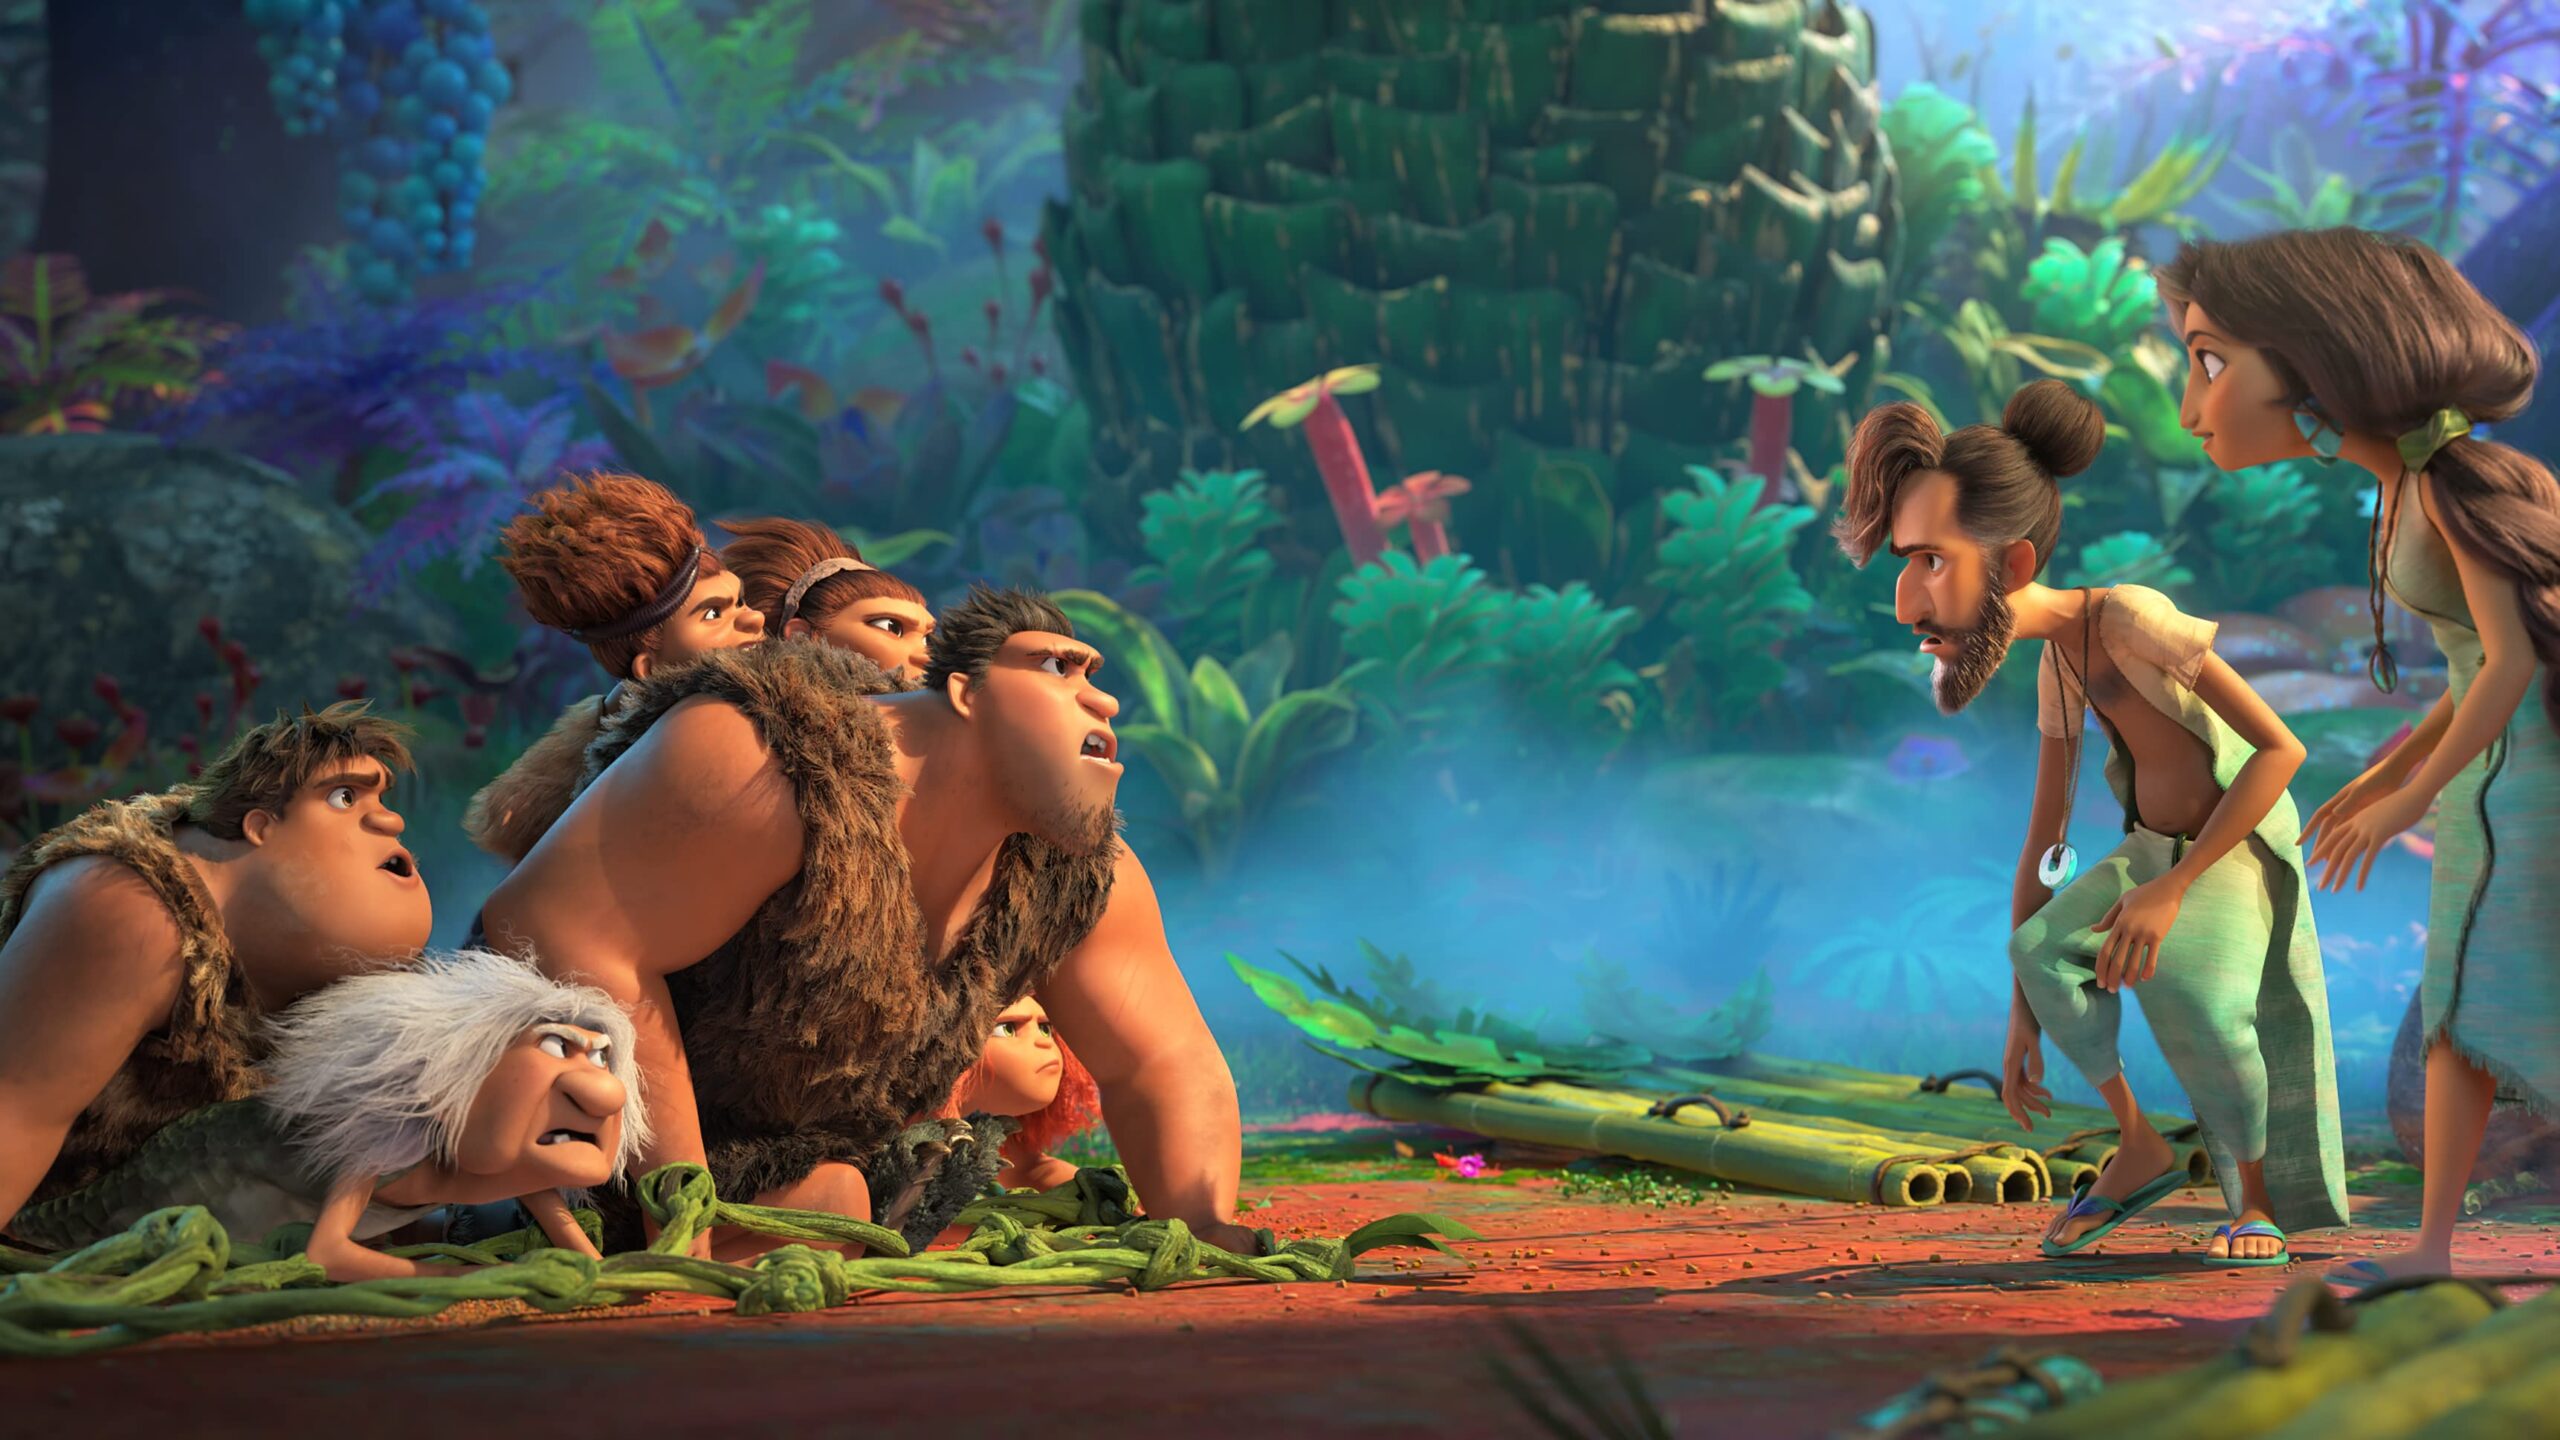 Family Film! The Croods: A New Age